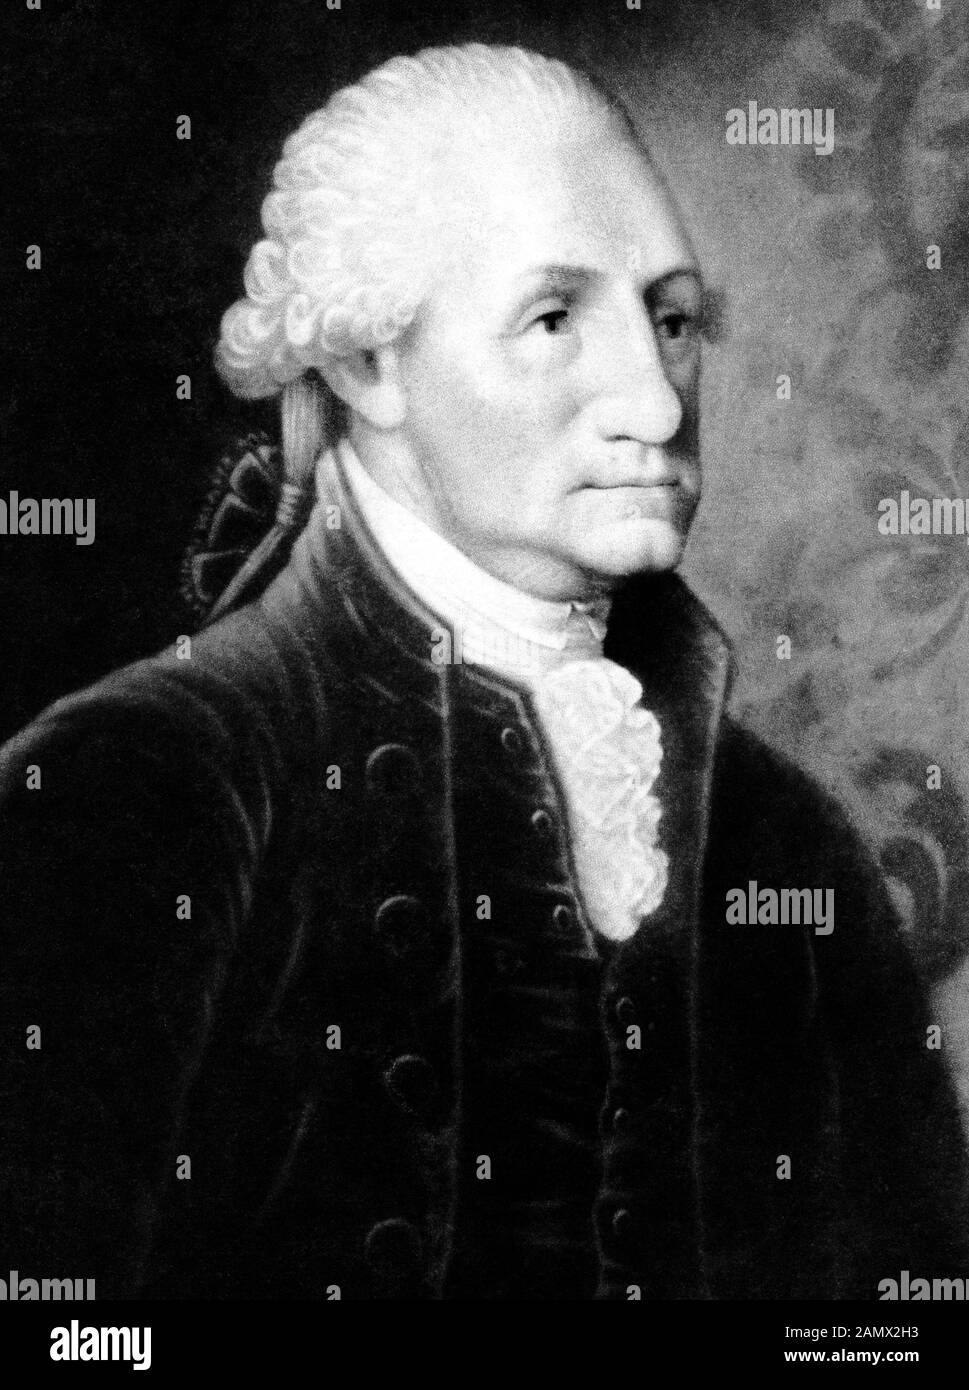 Vintage portrait of George Washington (1732 - 1799) – Commander of the Continental Army in the American Revolutionary War / War of Independence (1775 – 1783) and the first US President (1789 - 1797). Detail from a 1793 print, from a painting by artist Edward Savage (1761 – 1817). Stock Photo